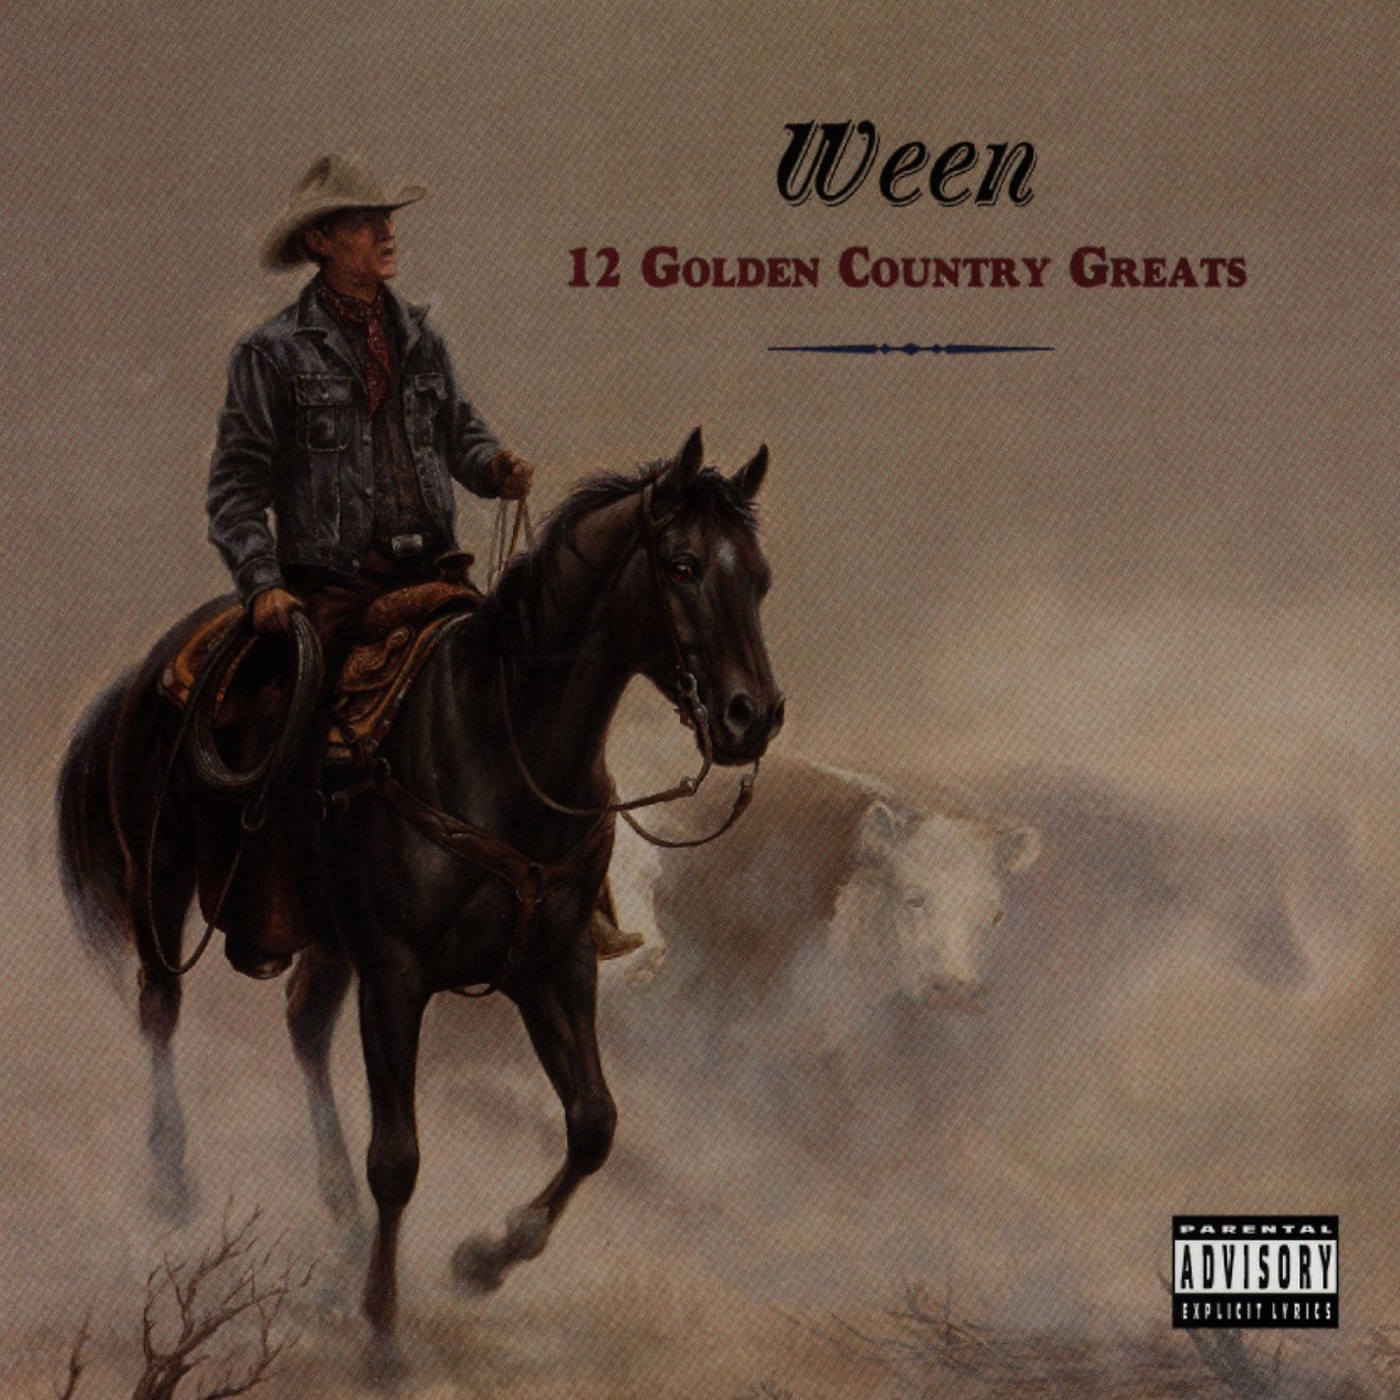 12 Golden Country Greats by Ween